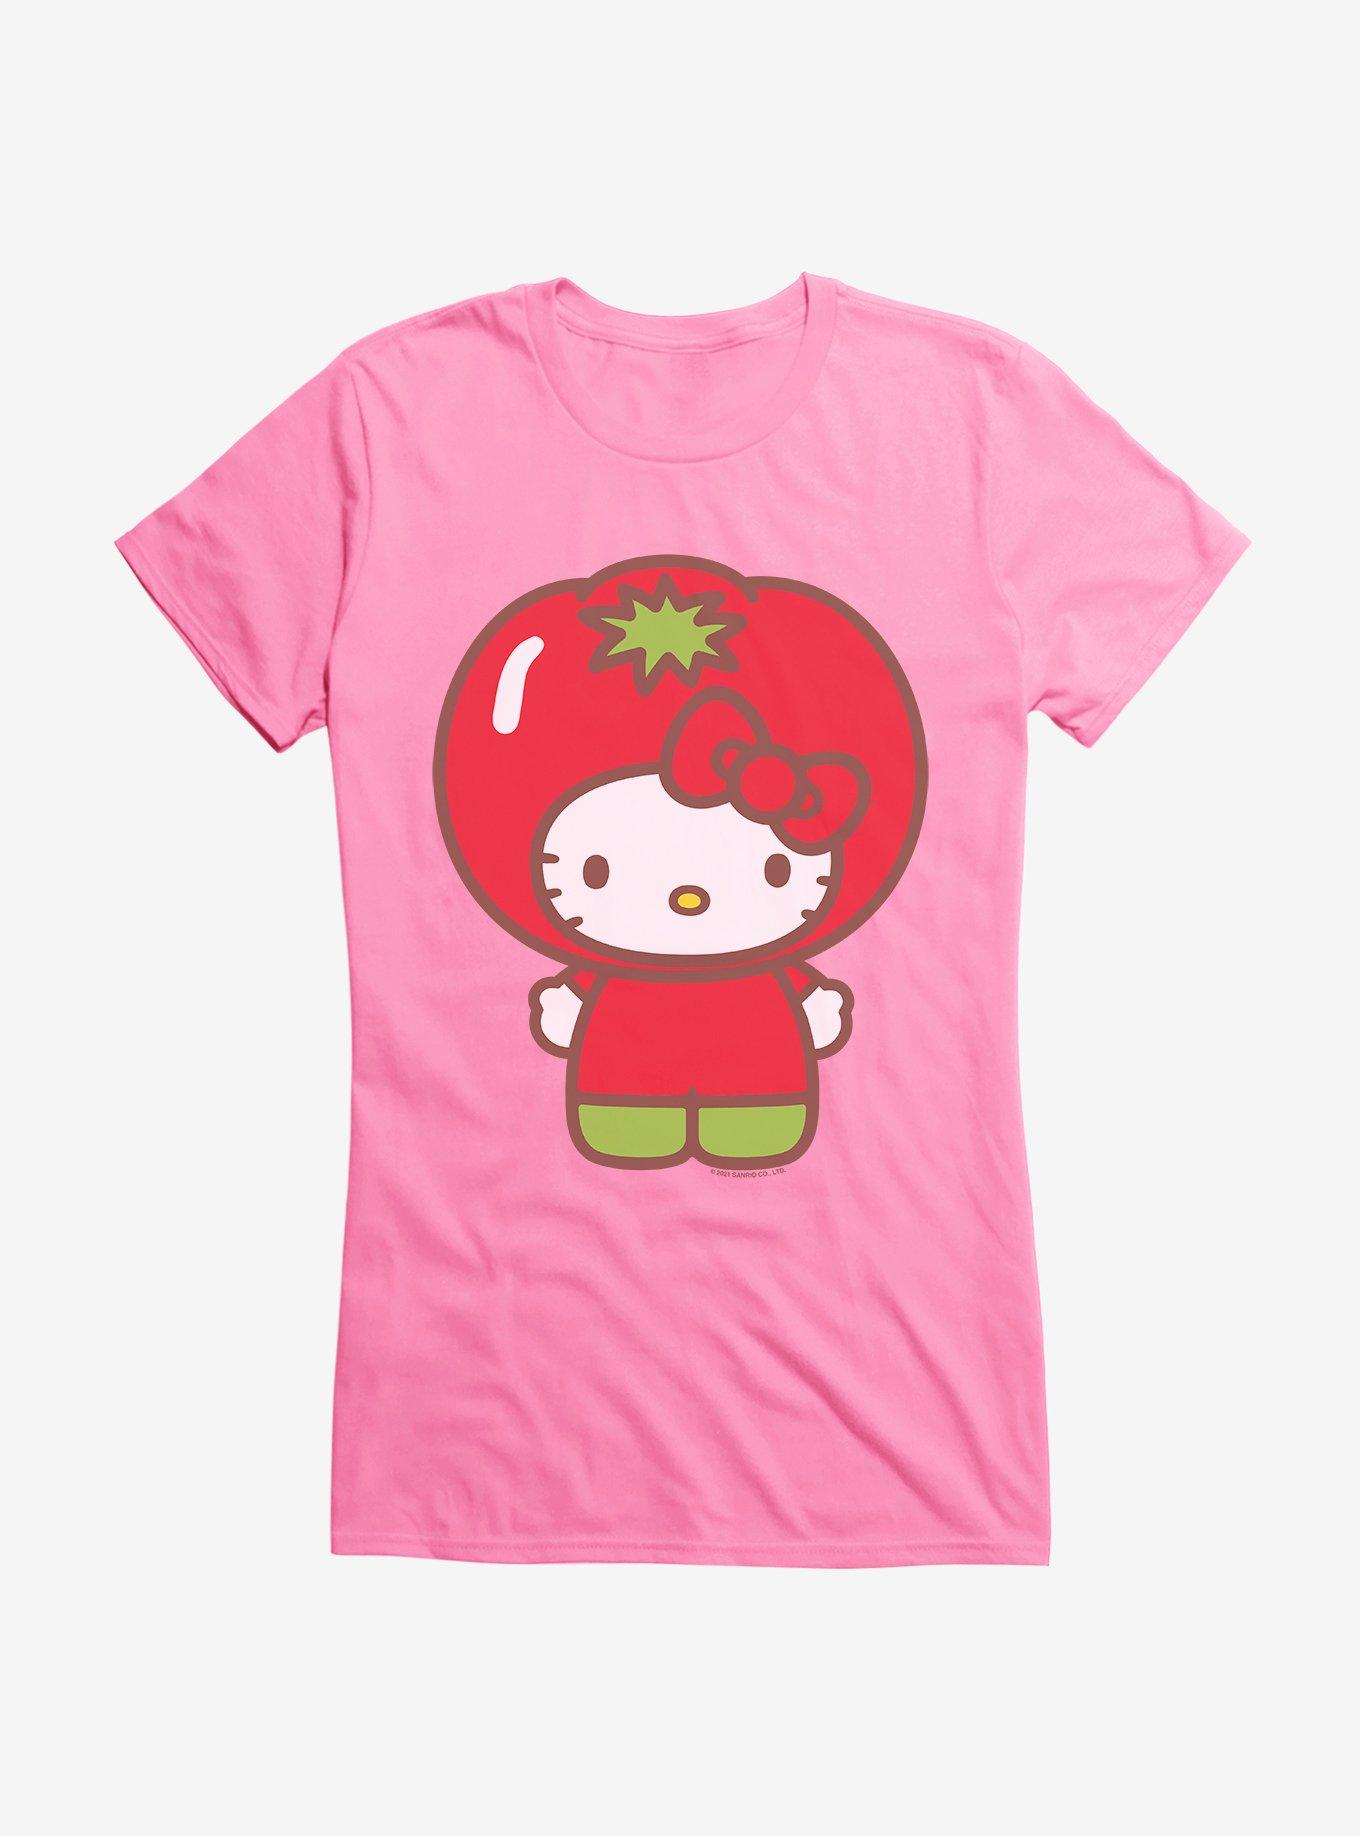 Hello Kitty Five A Day Tomato Day Girls T-Shirt, , hi-res